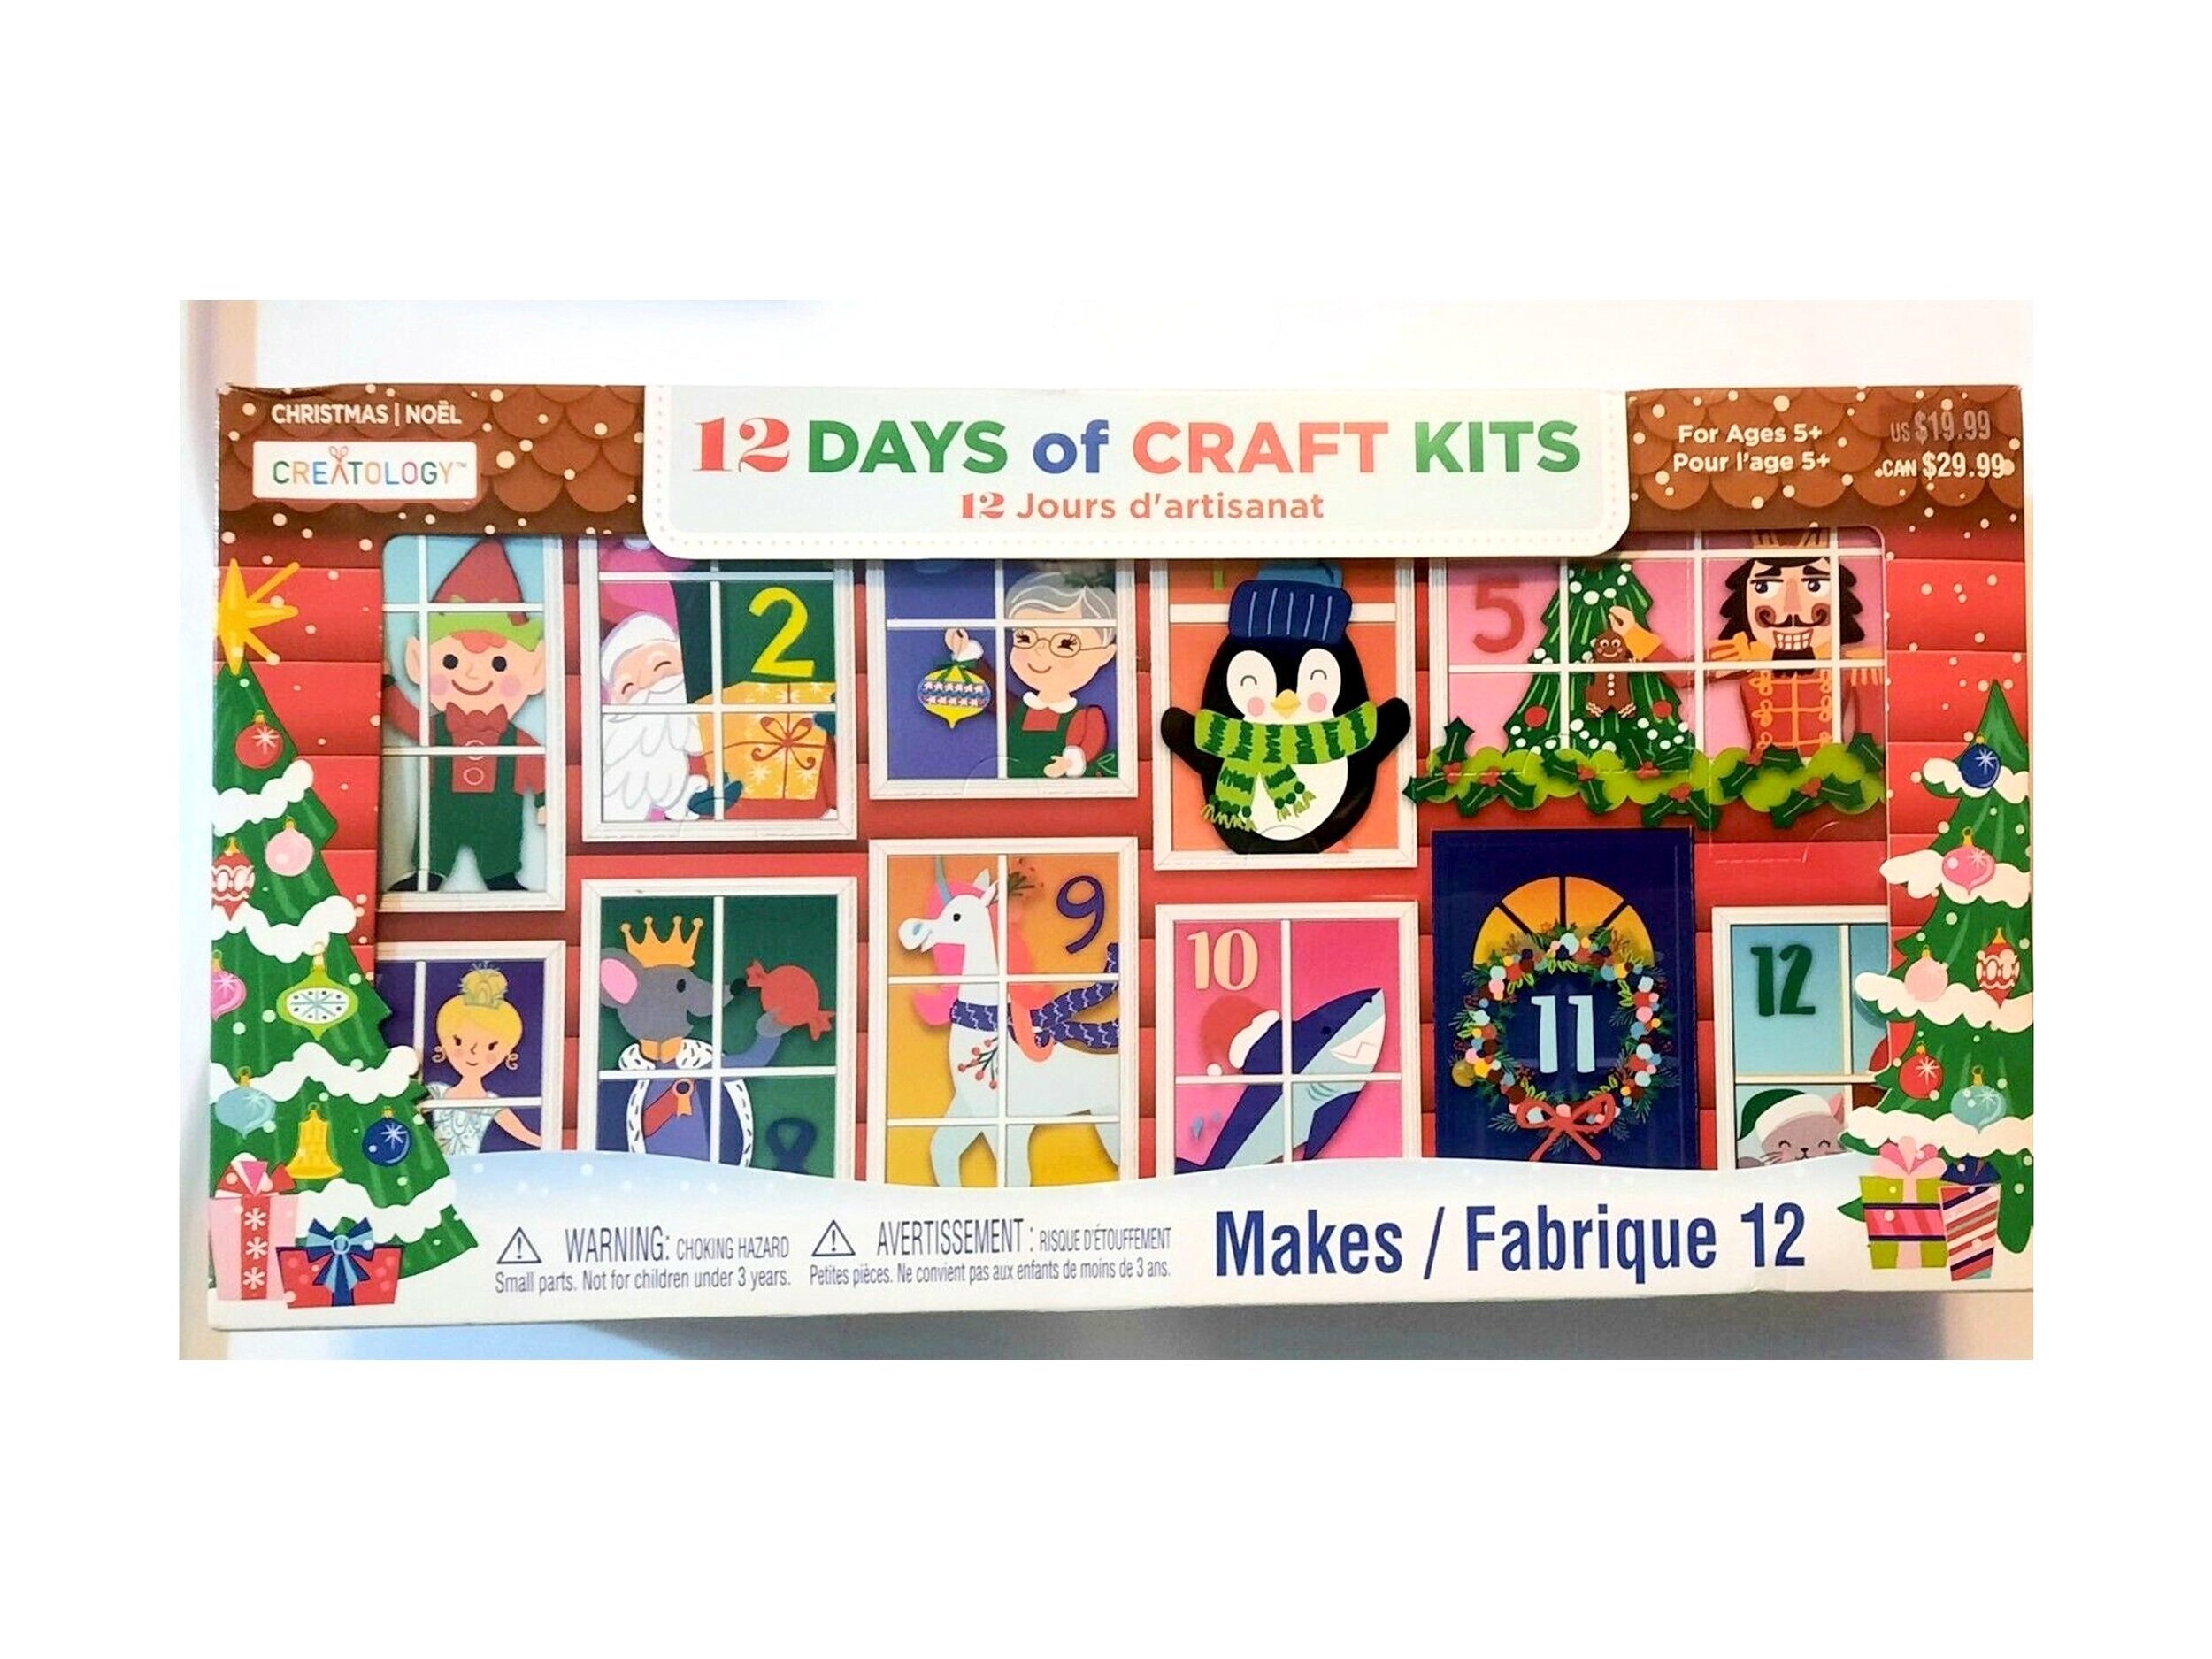 12 Days of Crafts created for Michael's